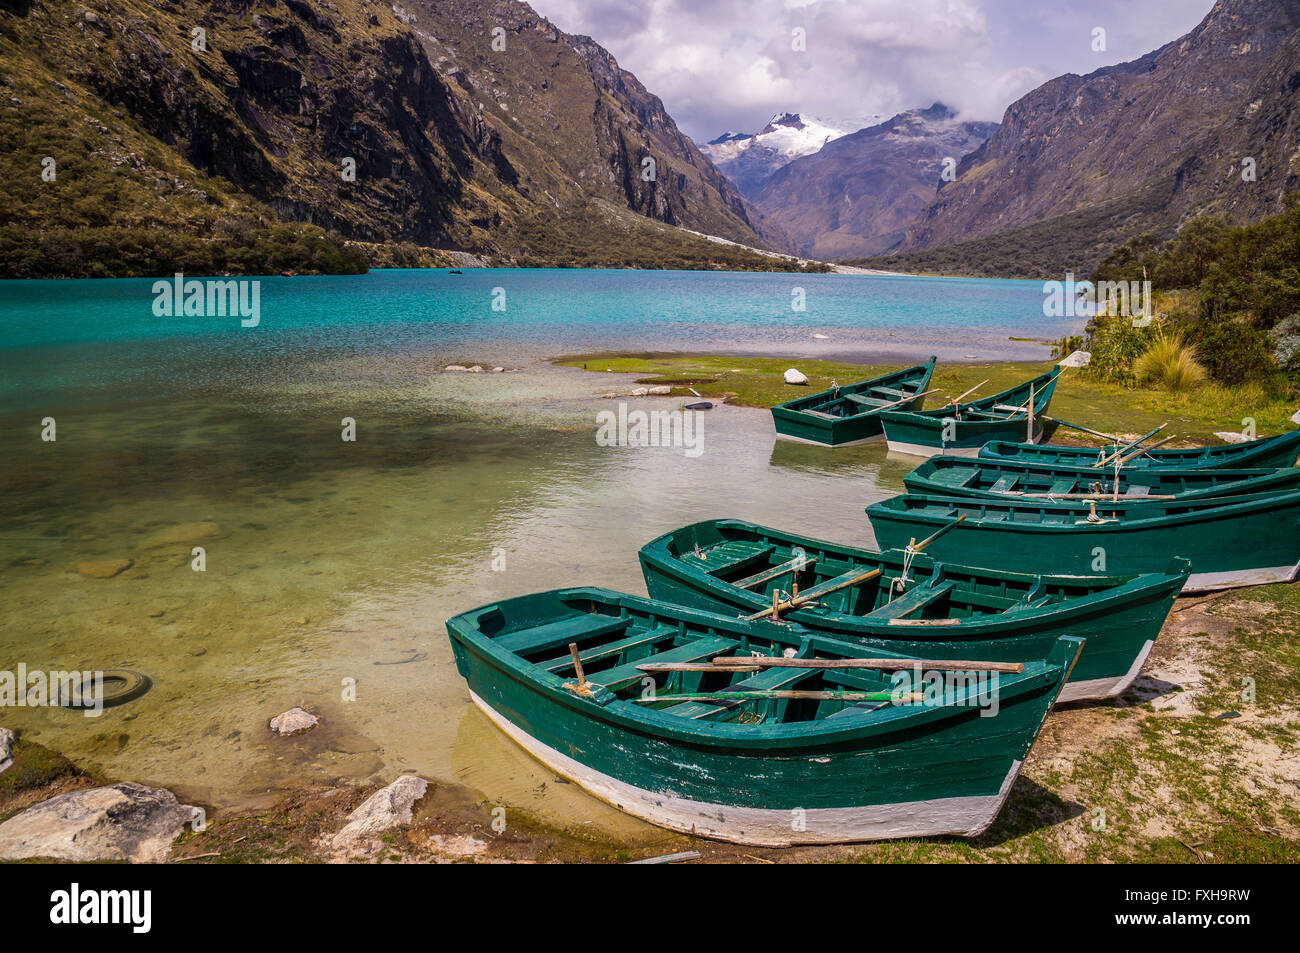 Huaraz, PERU in November 2015: Six green boats are waiting to be sailed across the blue glacier lagoon in the Peruvian Andes. Hu Stock Photo